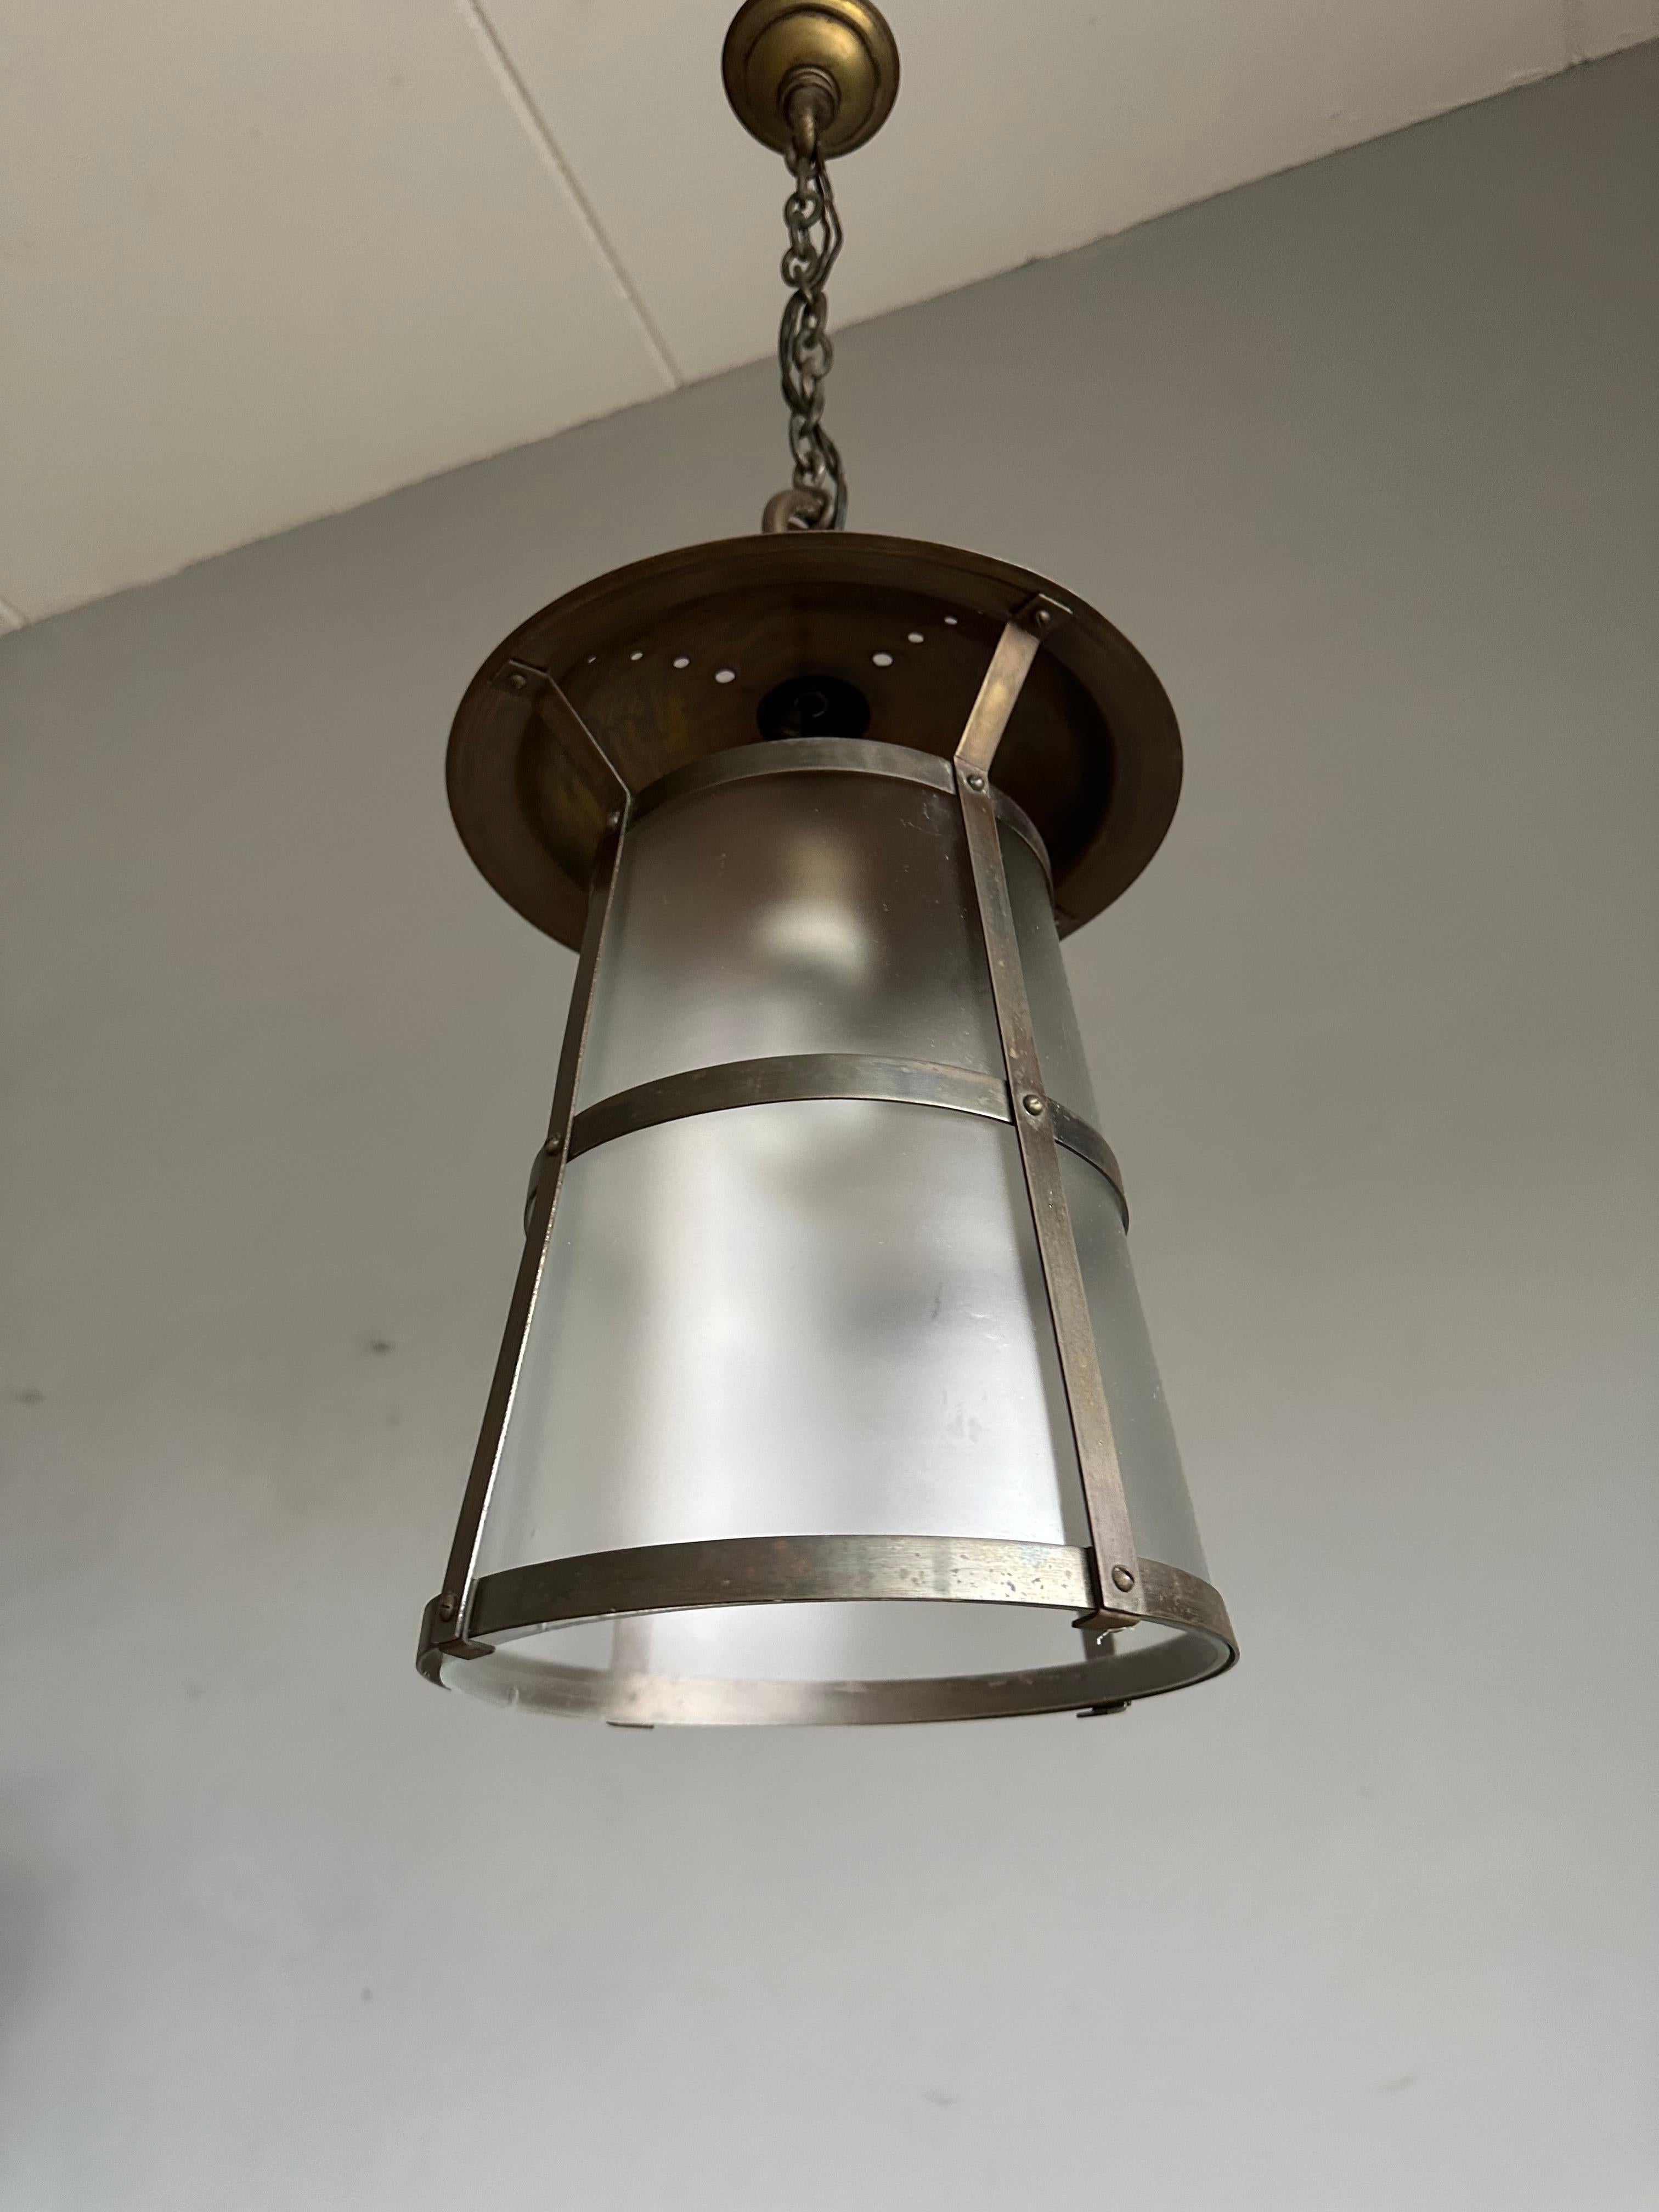 Marvelous design and execution pendant light / lantern. In the manner of Hendrik Berlage.

If you are looking for a stylish and quality crafted light to grace your entry hall, landing or bedroom then this Arts & Crafts fixture could be perfect for